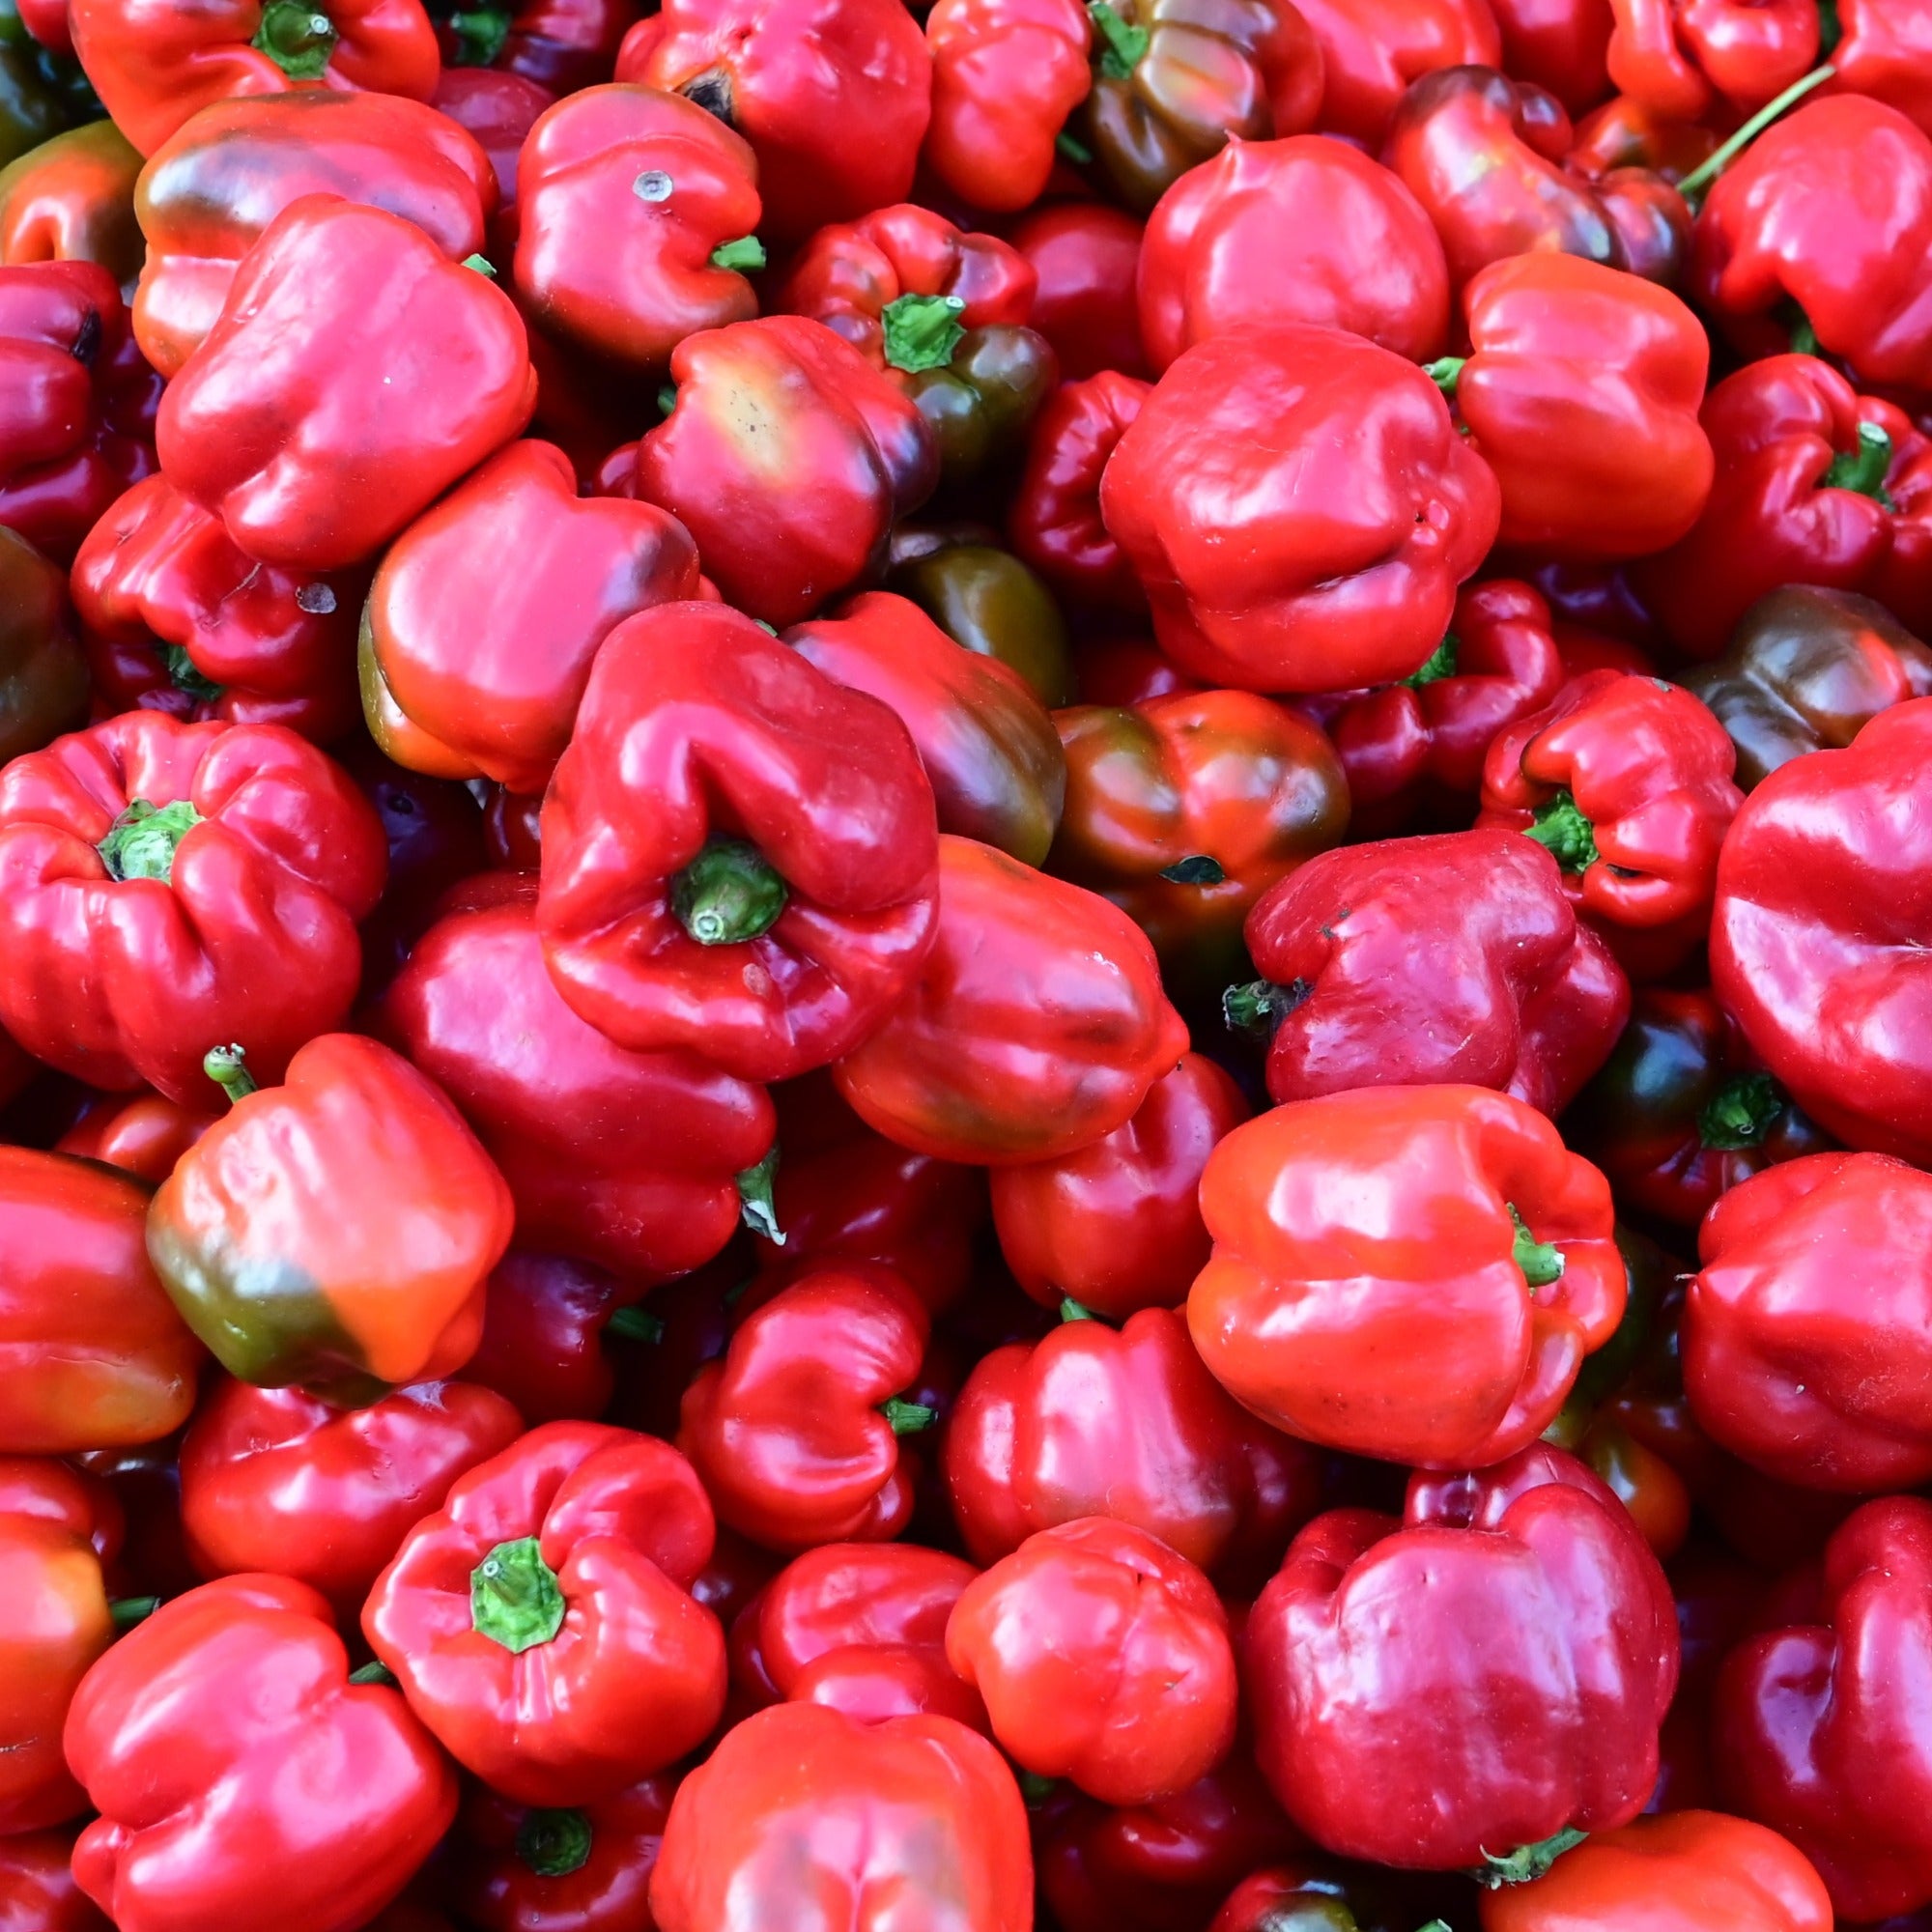 A bin of Wisconsin Lakes red bell peppers piled up